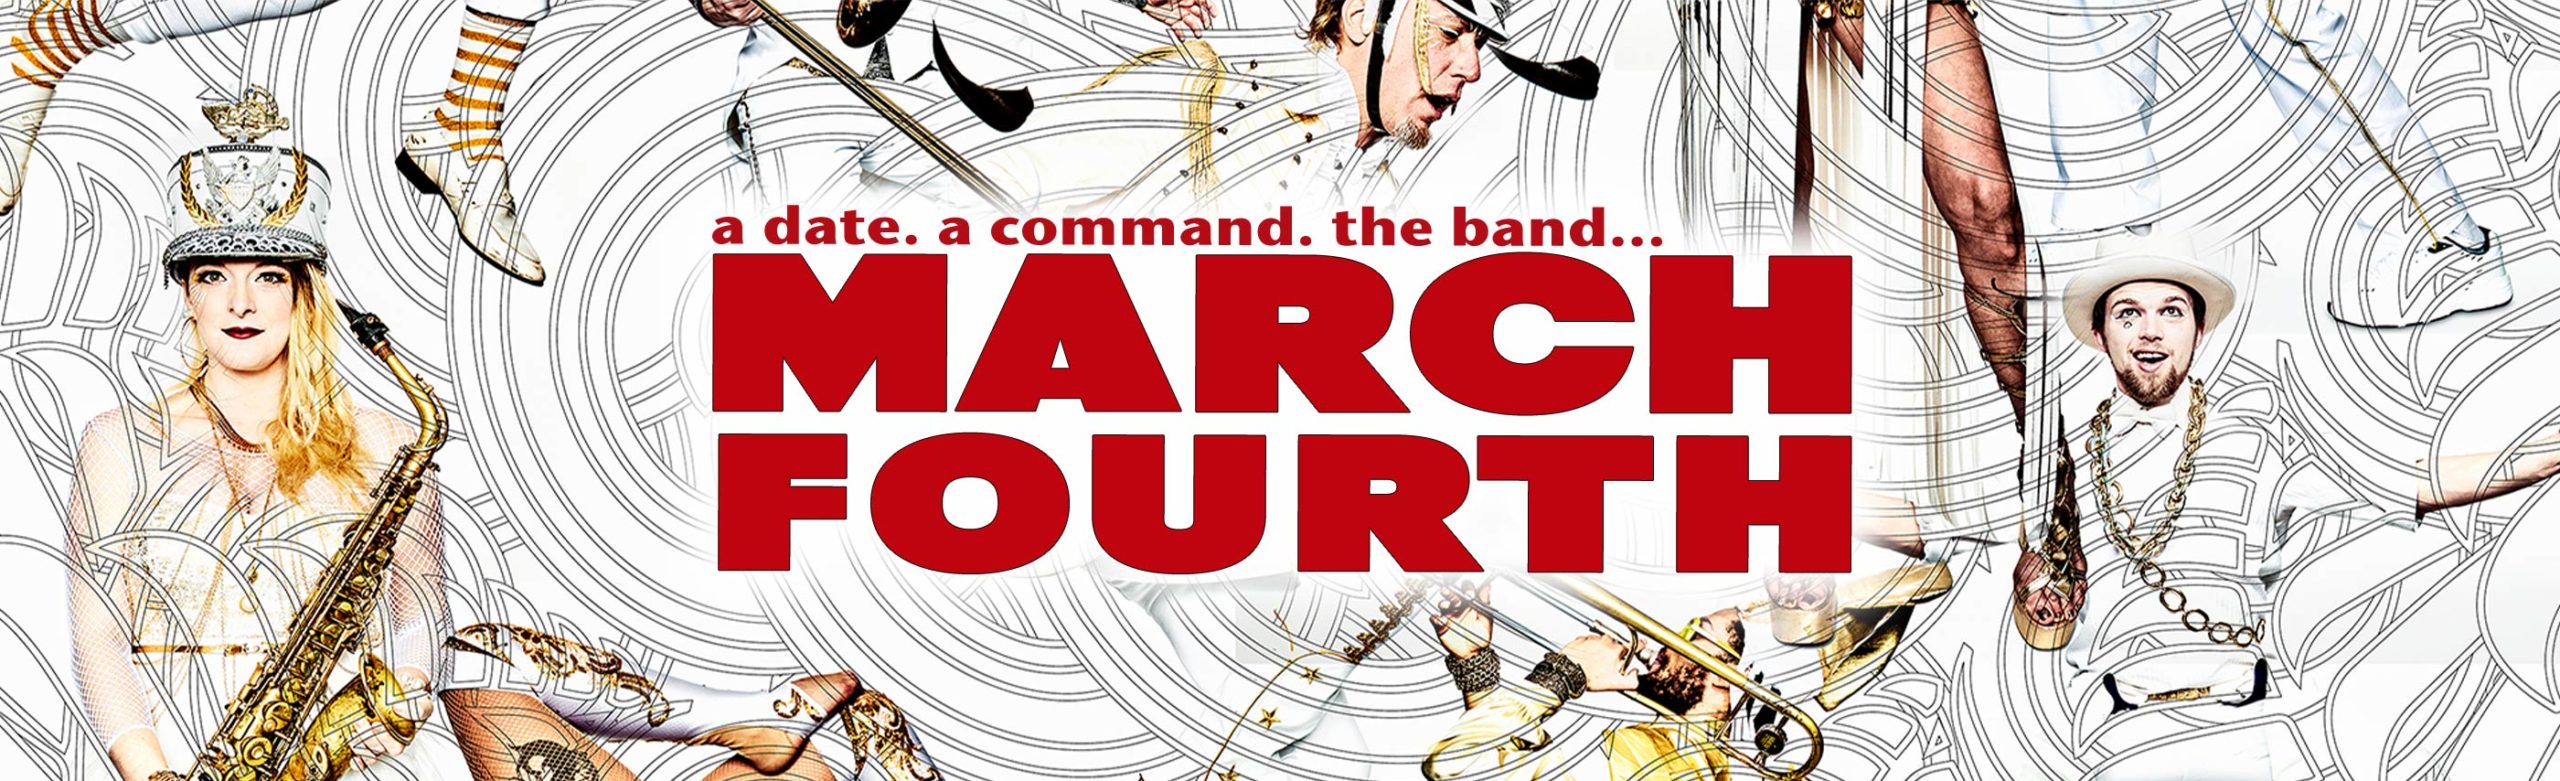 CANCELED: MarchFourth